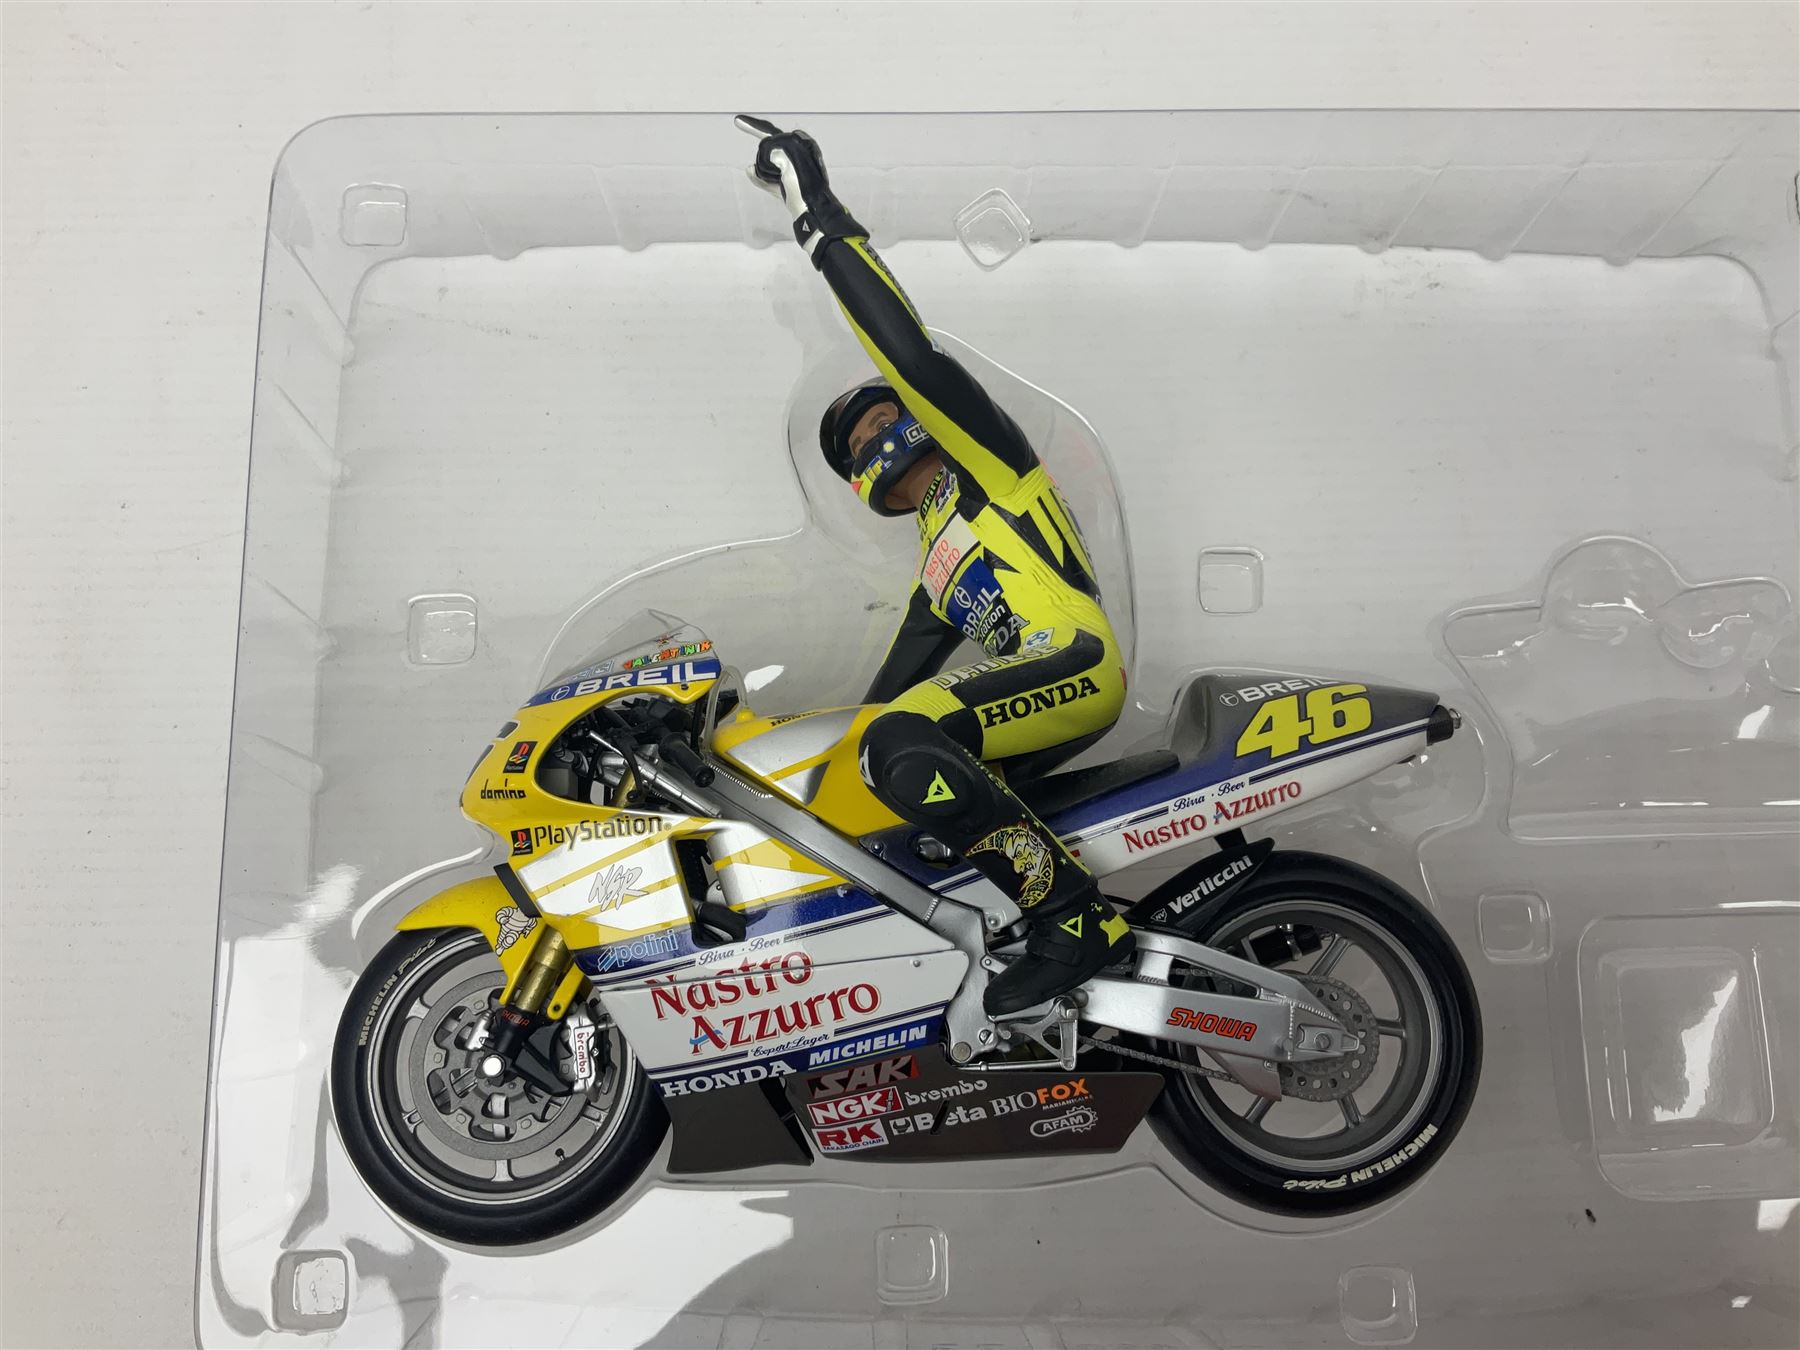 Two Minichamps limited edition Valentino Rossi Collection 1:12 scale die-cast motorcycles - Honda NS - Image 2 of 11